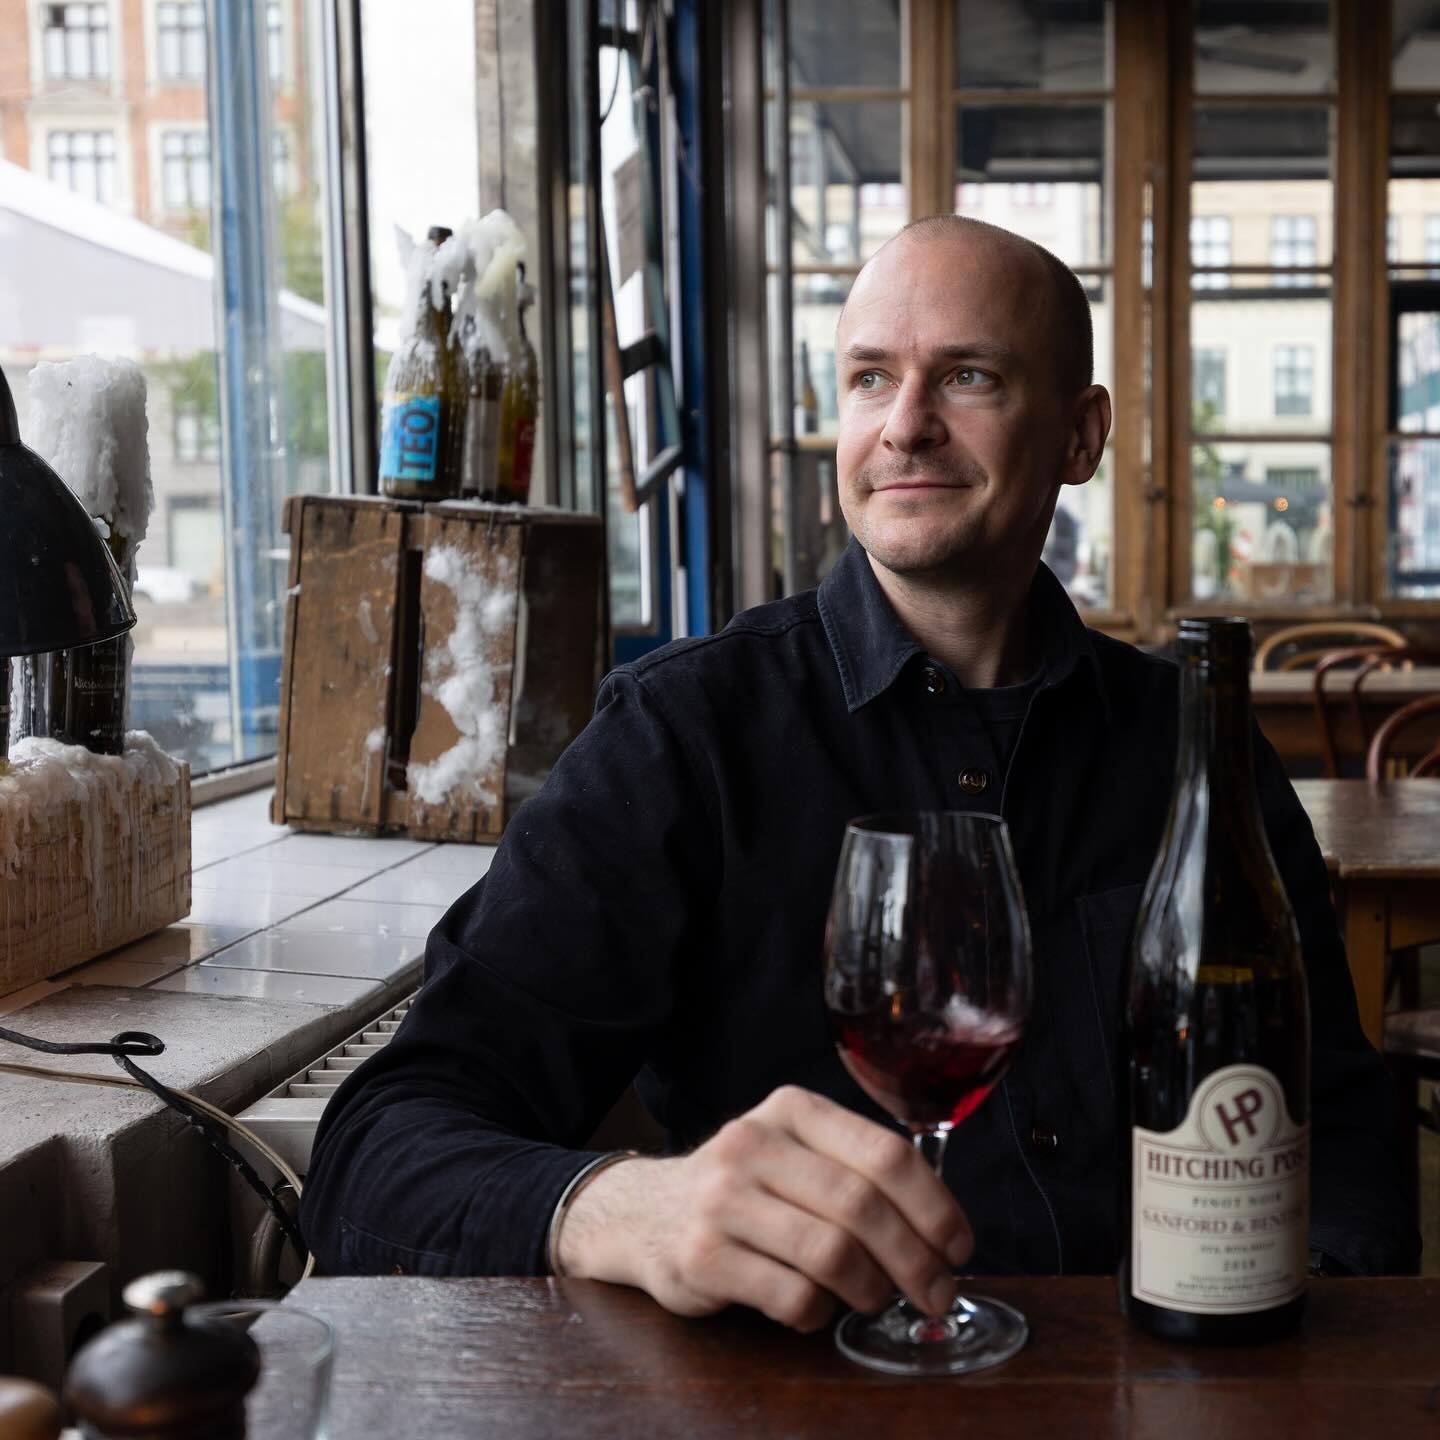 Ad - In my happy place: At Pat&eacute; Pat&eacute; Restaurant in Copenhagen, while tasting a beautiful bottle of Pinot from Sanford and Benedict vineyard to celebrate the California Wine Weeks that are taking place right now. I did not know Hitching 